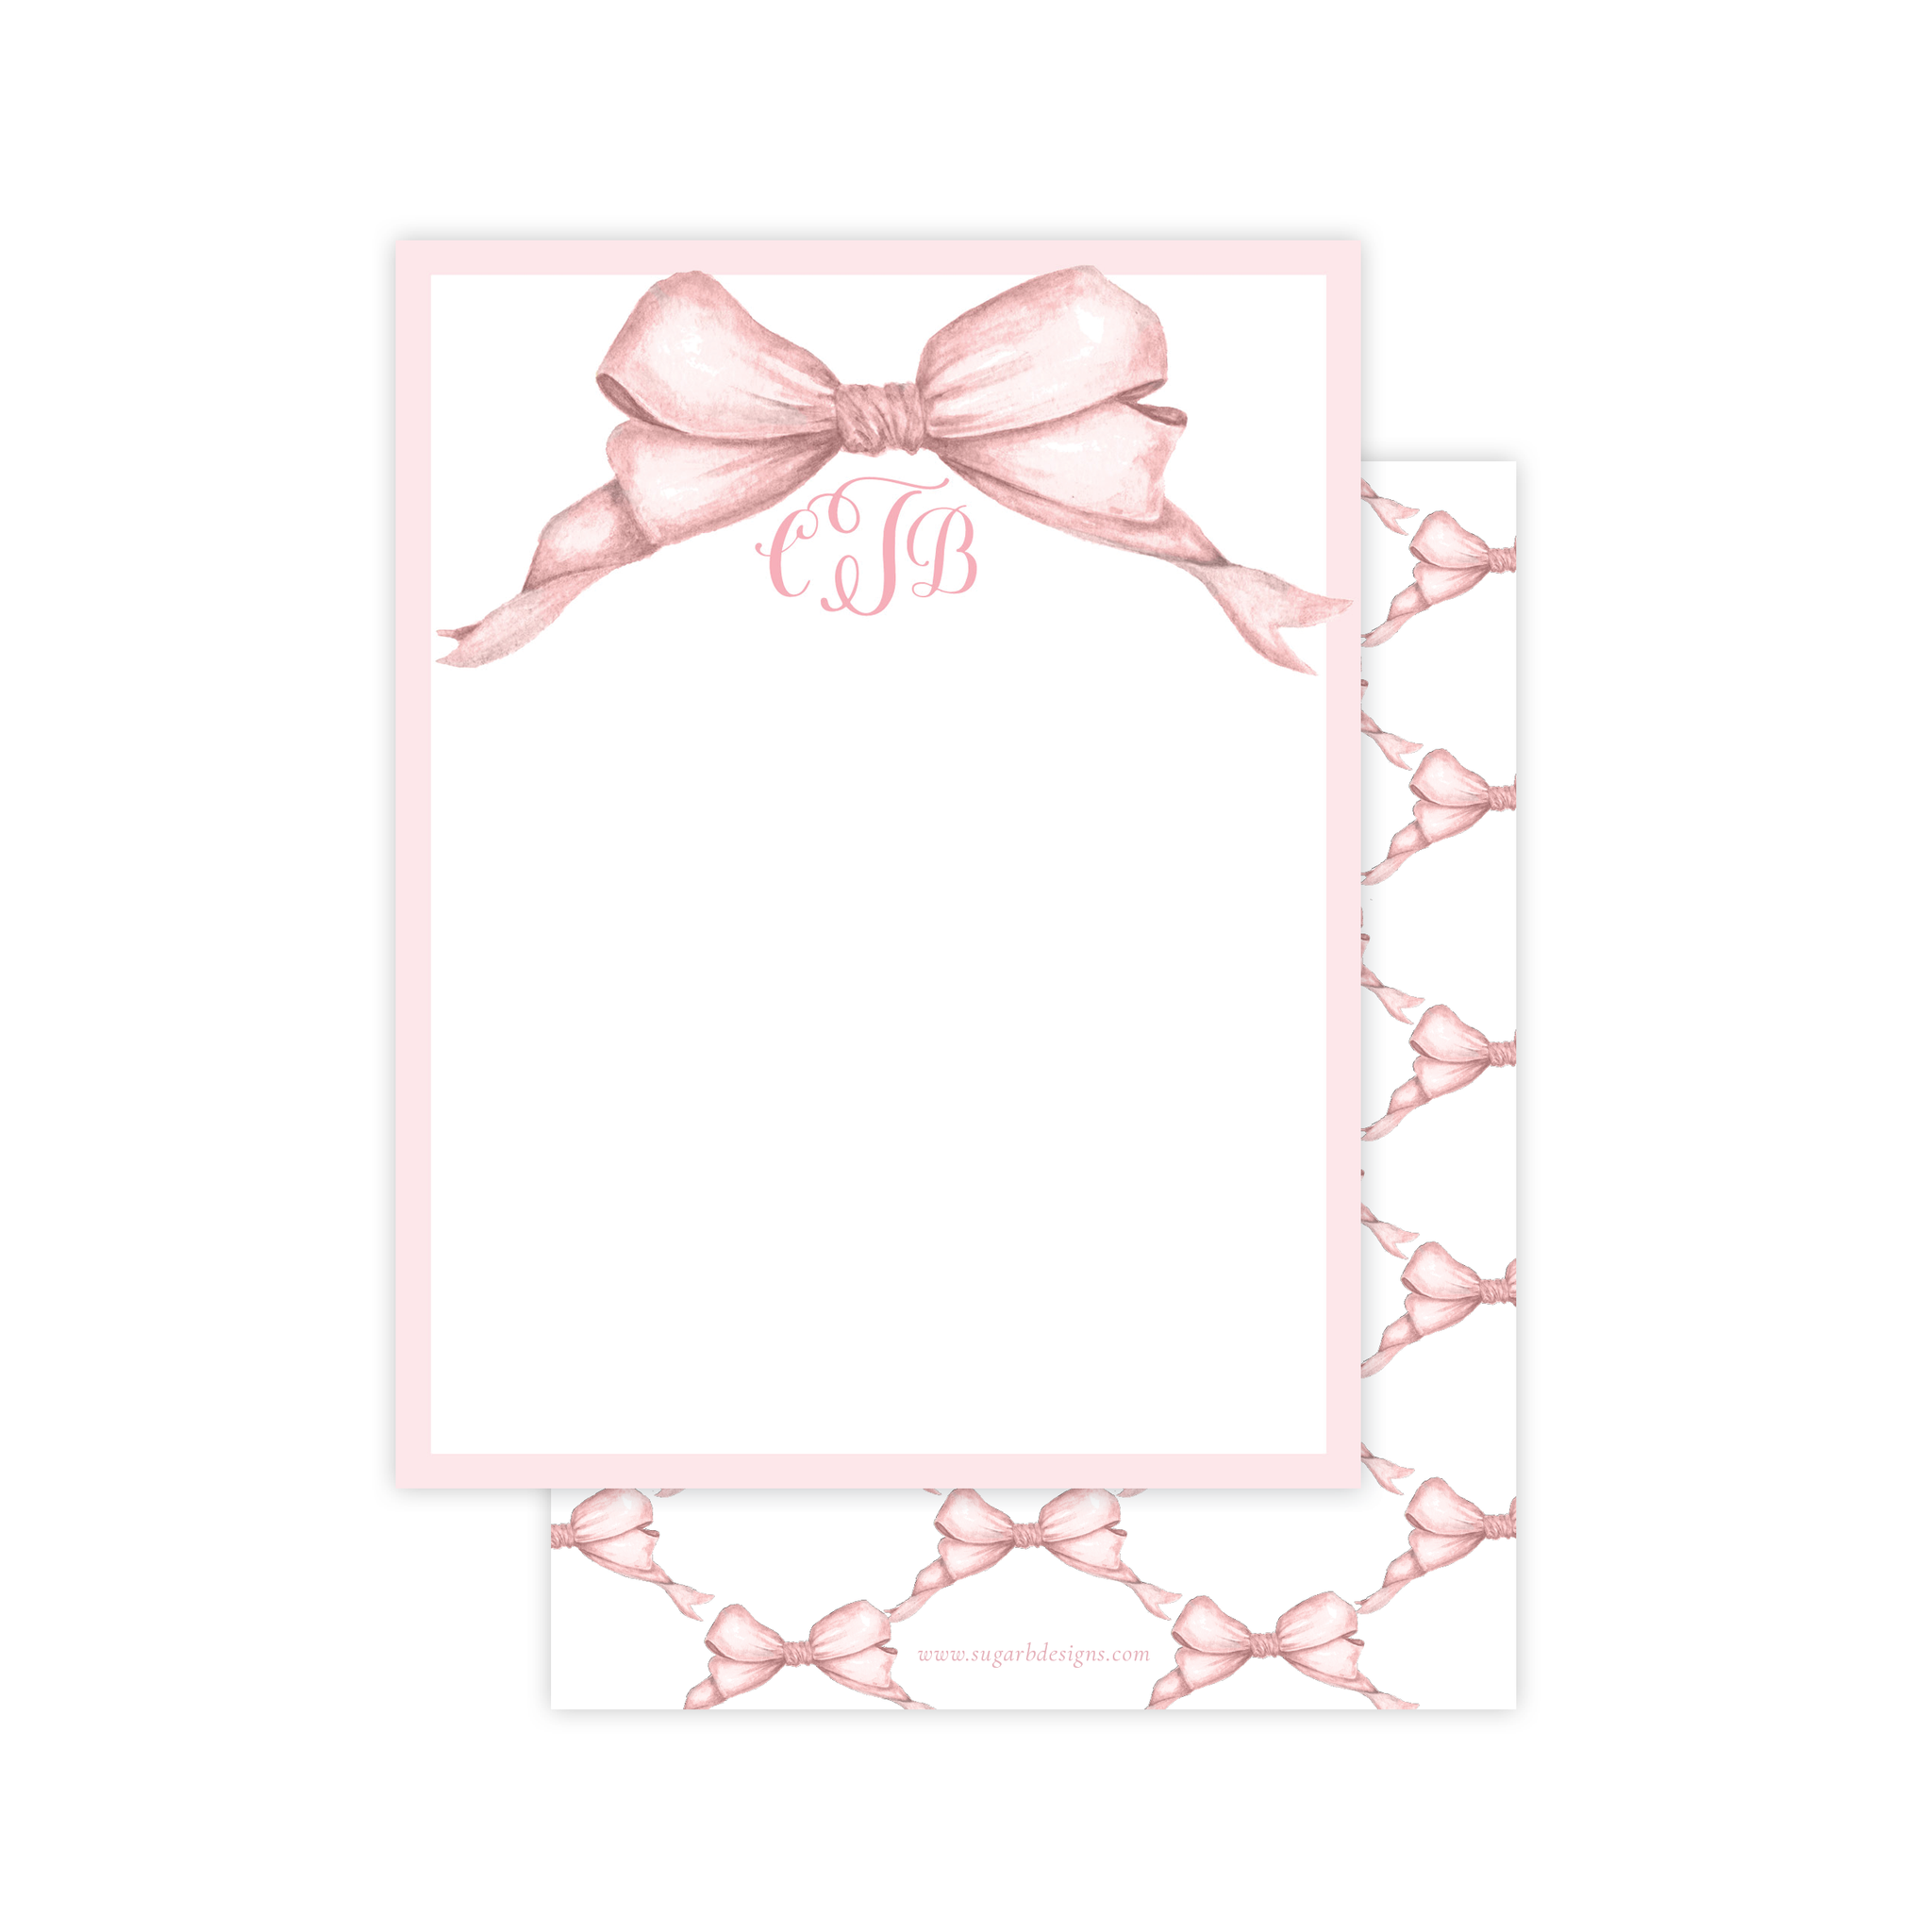 Gable Pink Bow Flat Stationery